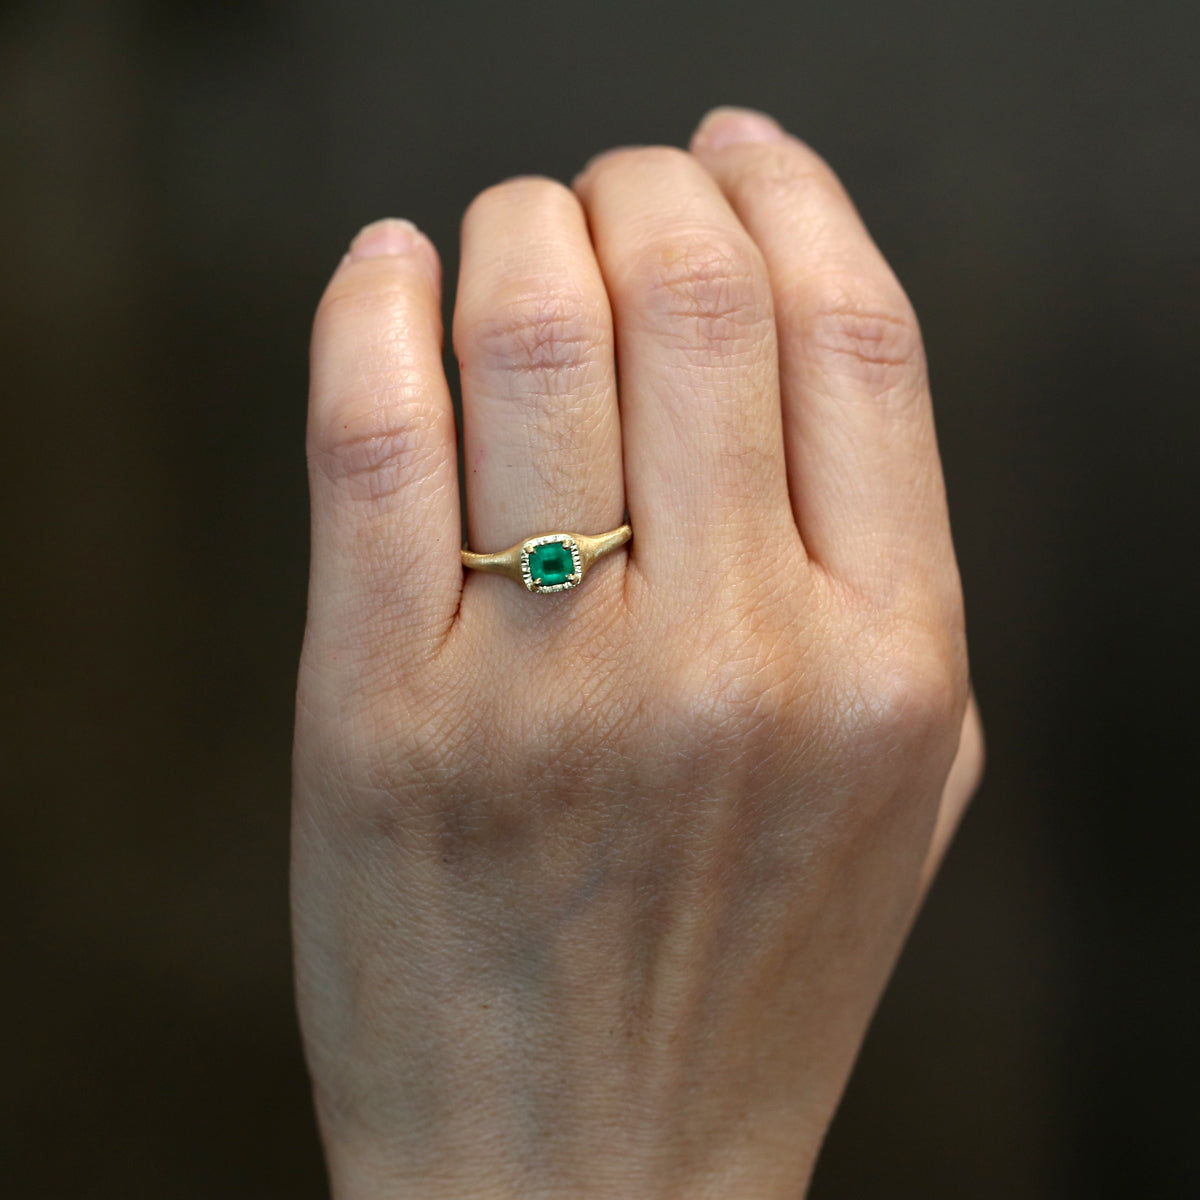 0.37ct Colombian Emerald  Ring